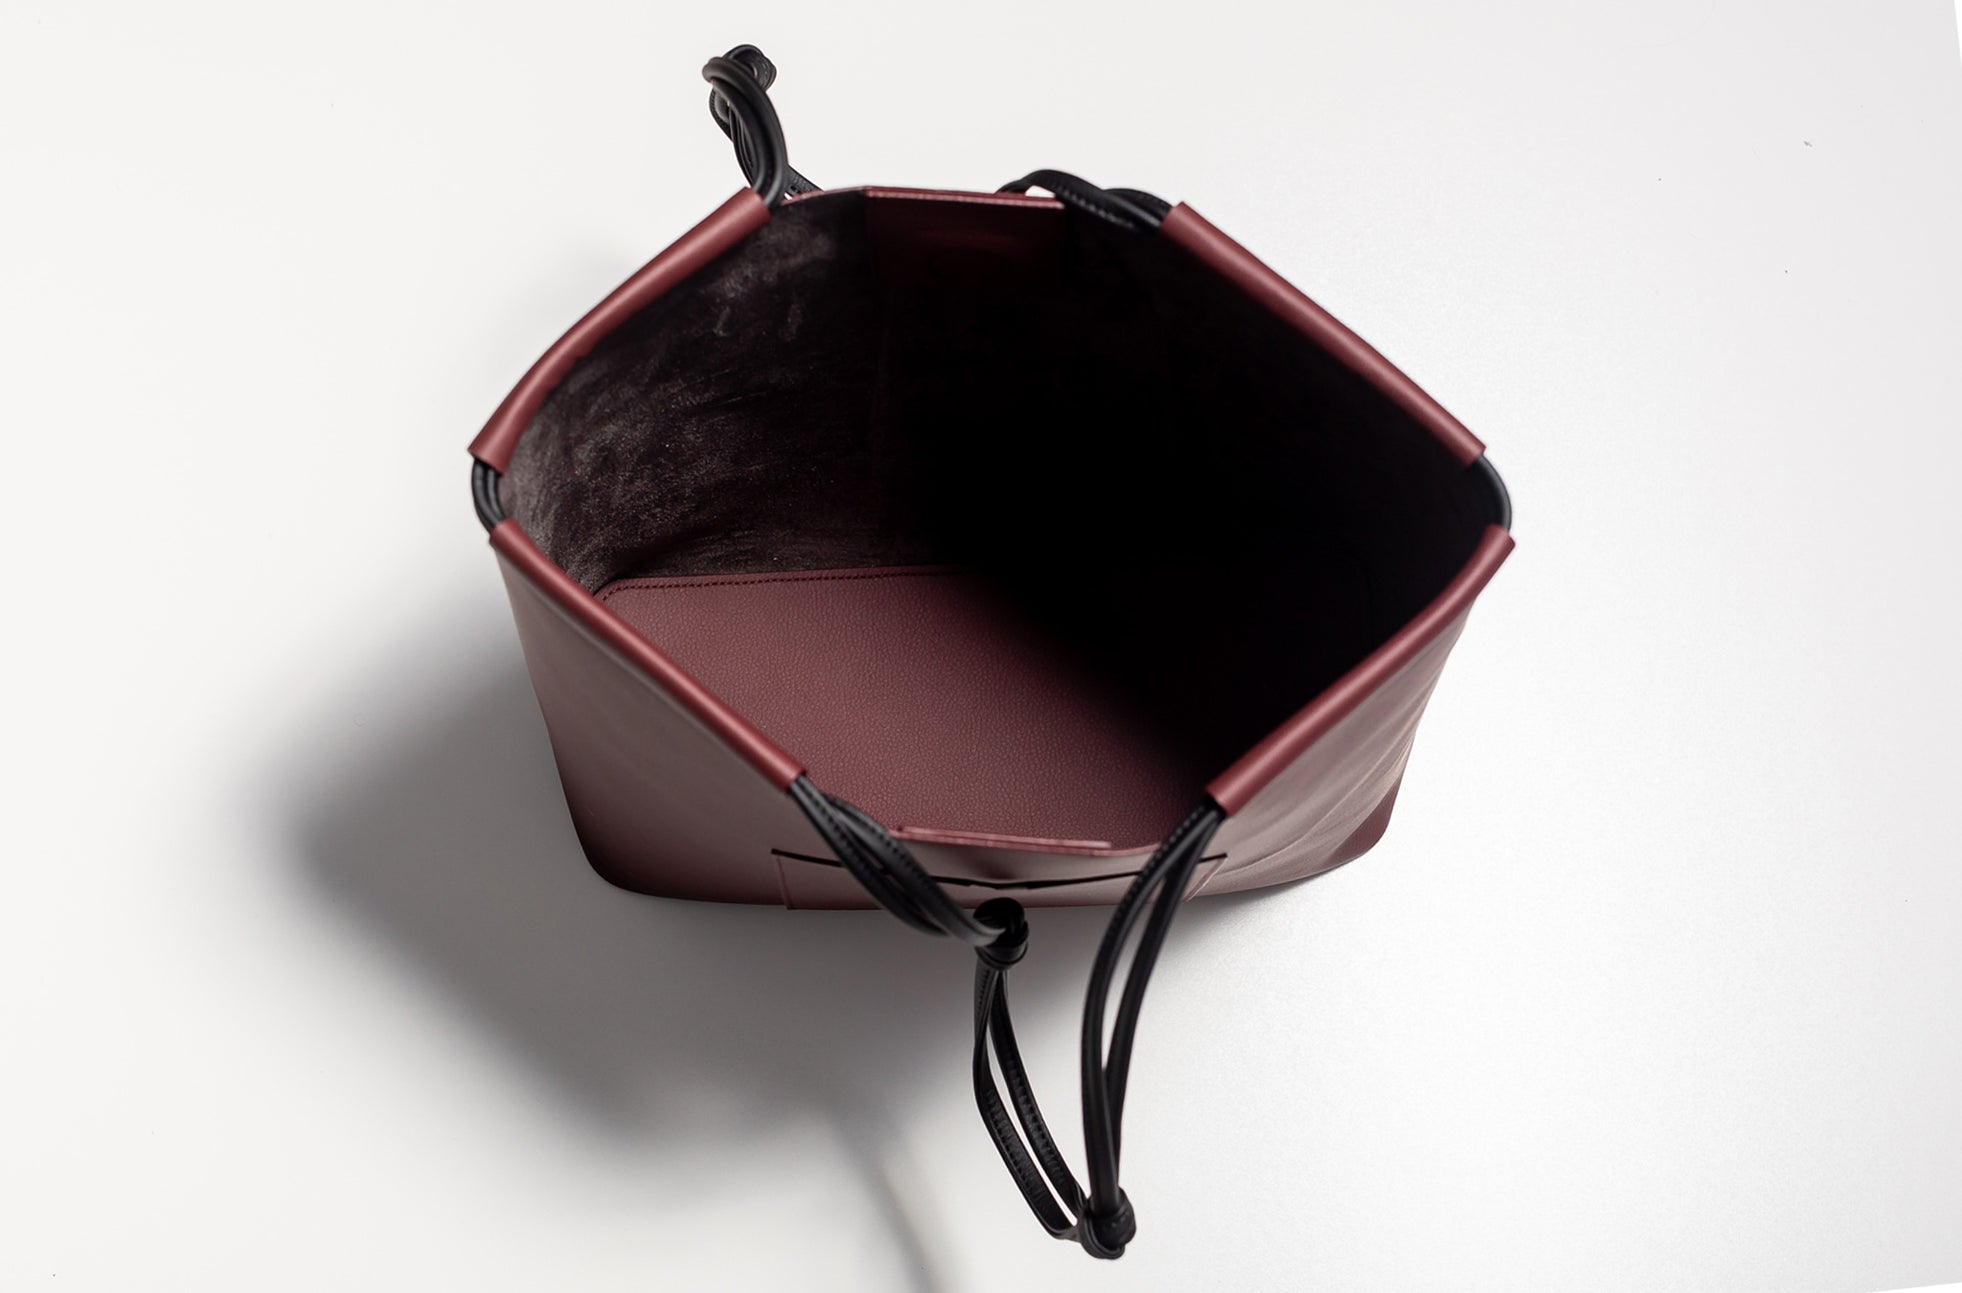 The Market Tote in Technik-Leather in Burgundy and Black image 7